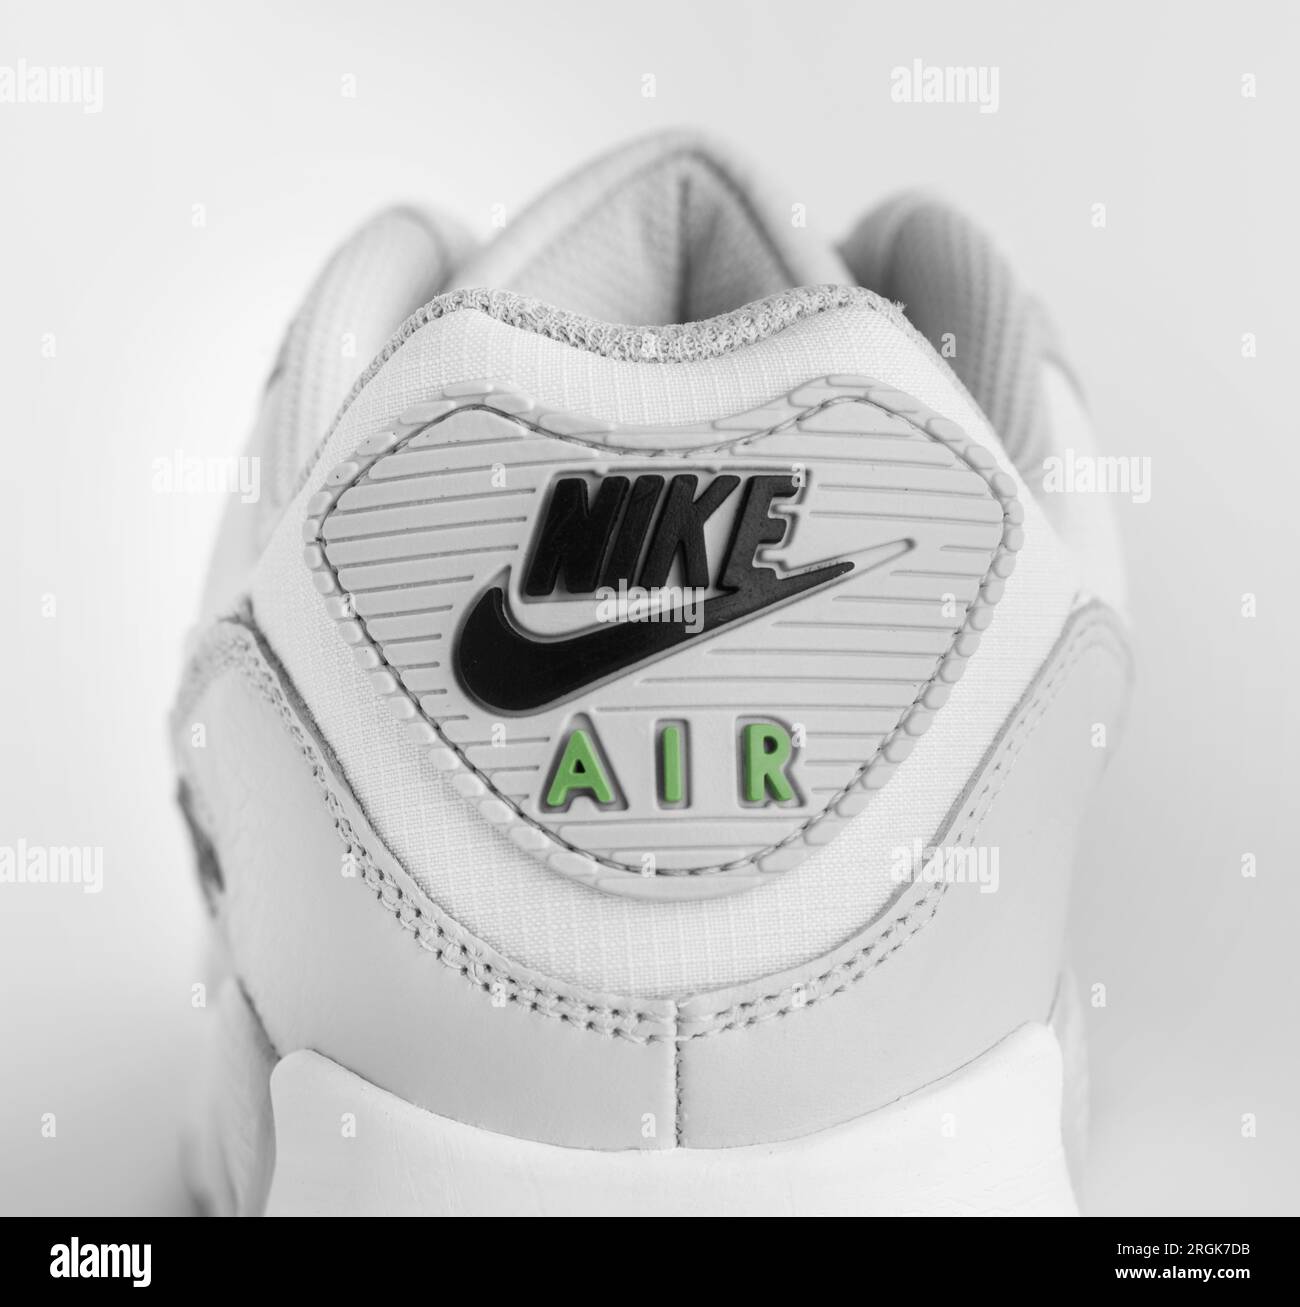 Istanbul, Turkey - April 12, 2023: Nike Air Max 90 GTX model shoes on white background. White and Gray color GORE-TEX shoes. Stock Photo